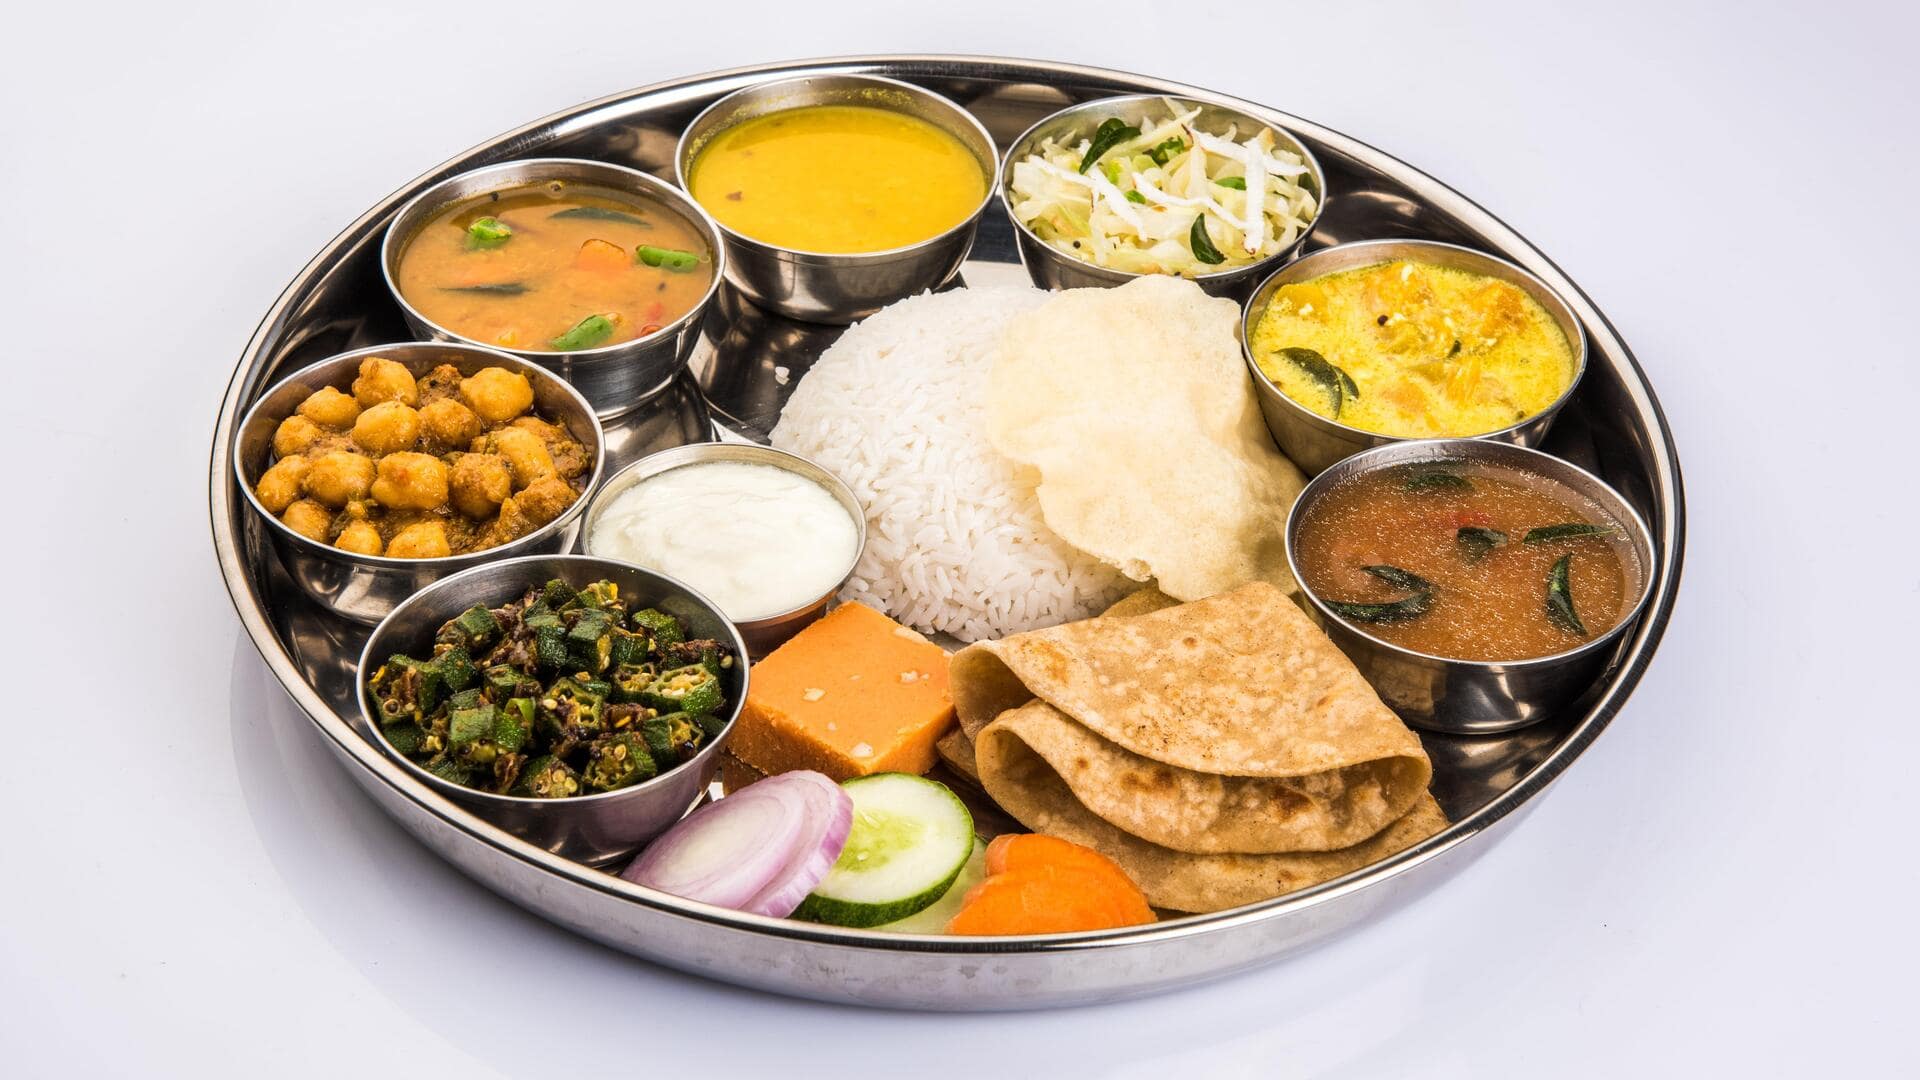 Why eating veg thali has gotten more expensive